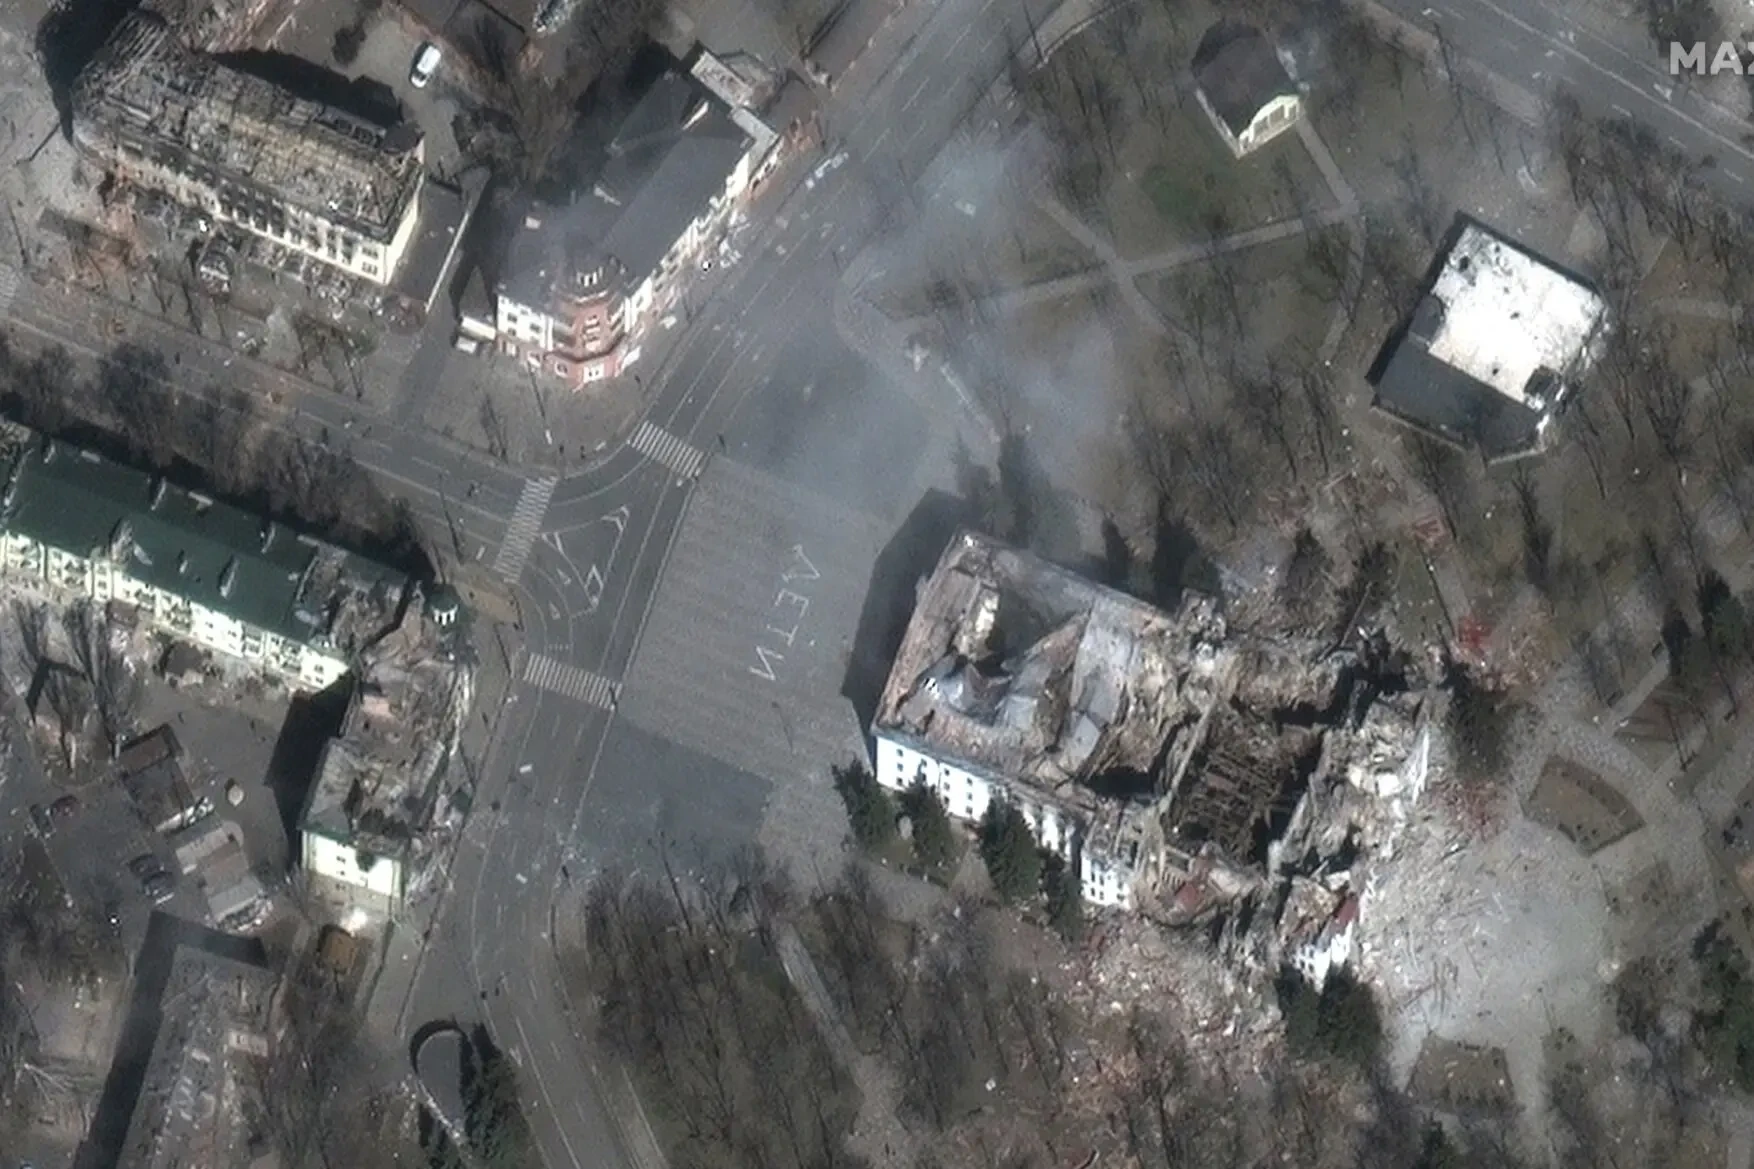 Fig.1 “Children”: The bombed-out Donetsk Academic Regional Drama Theatre in Mariupol, Ukraine. Maxar satellite image released on March 16, 2022 | NBC News